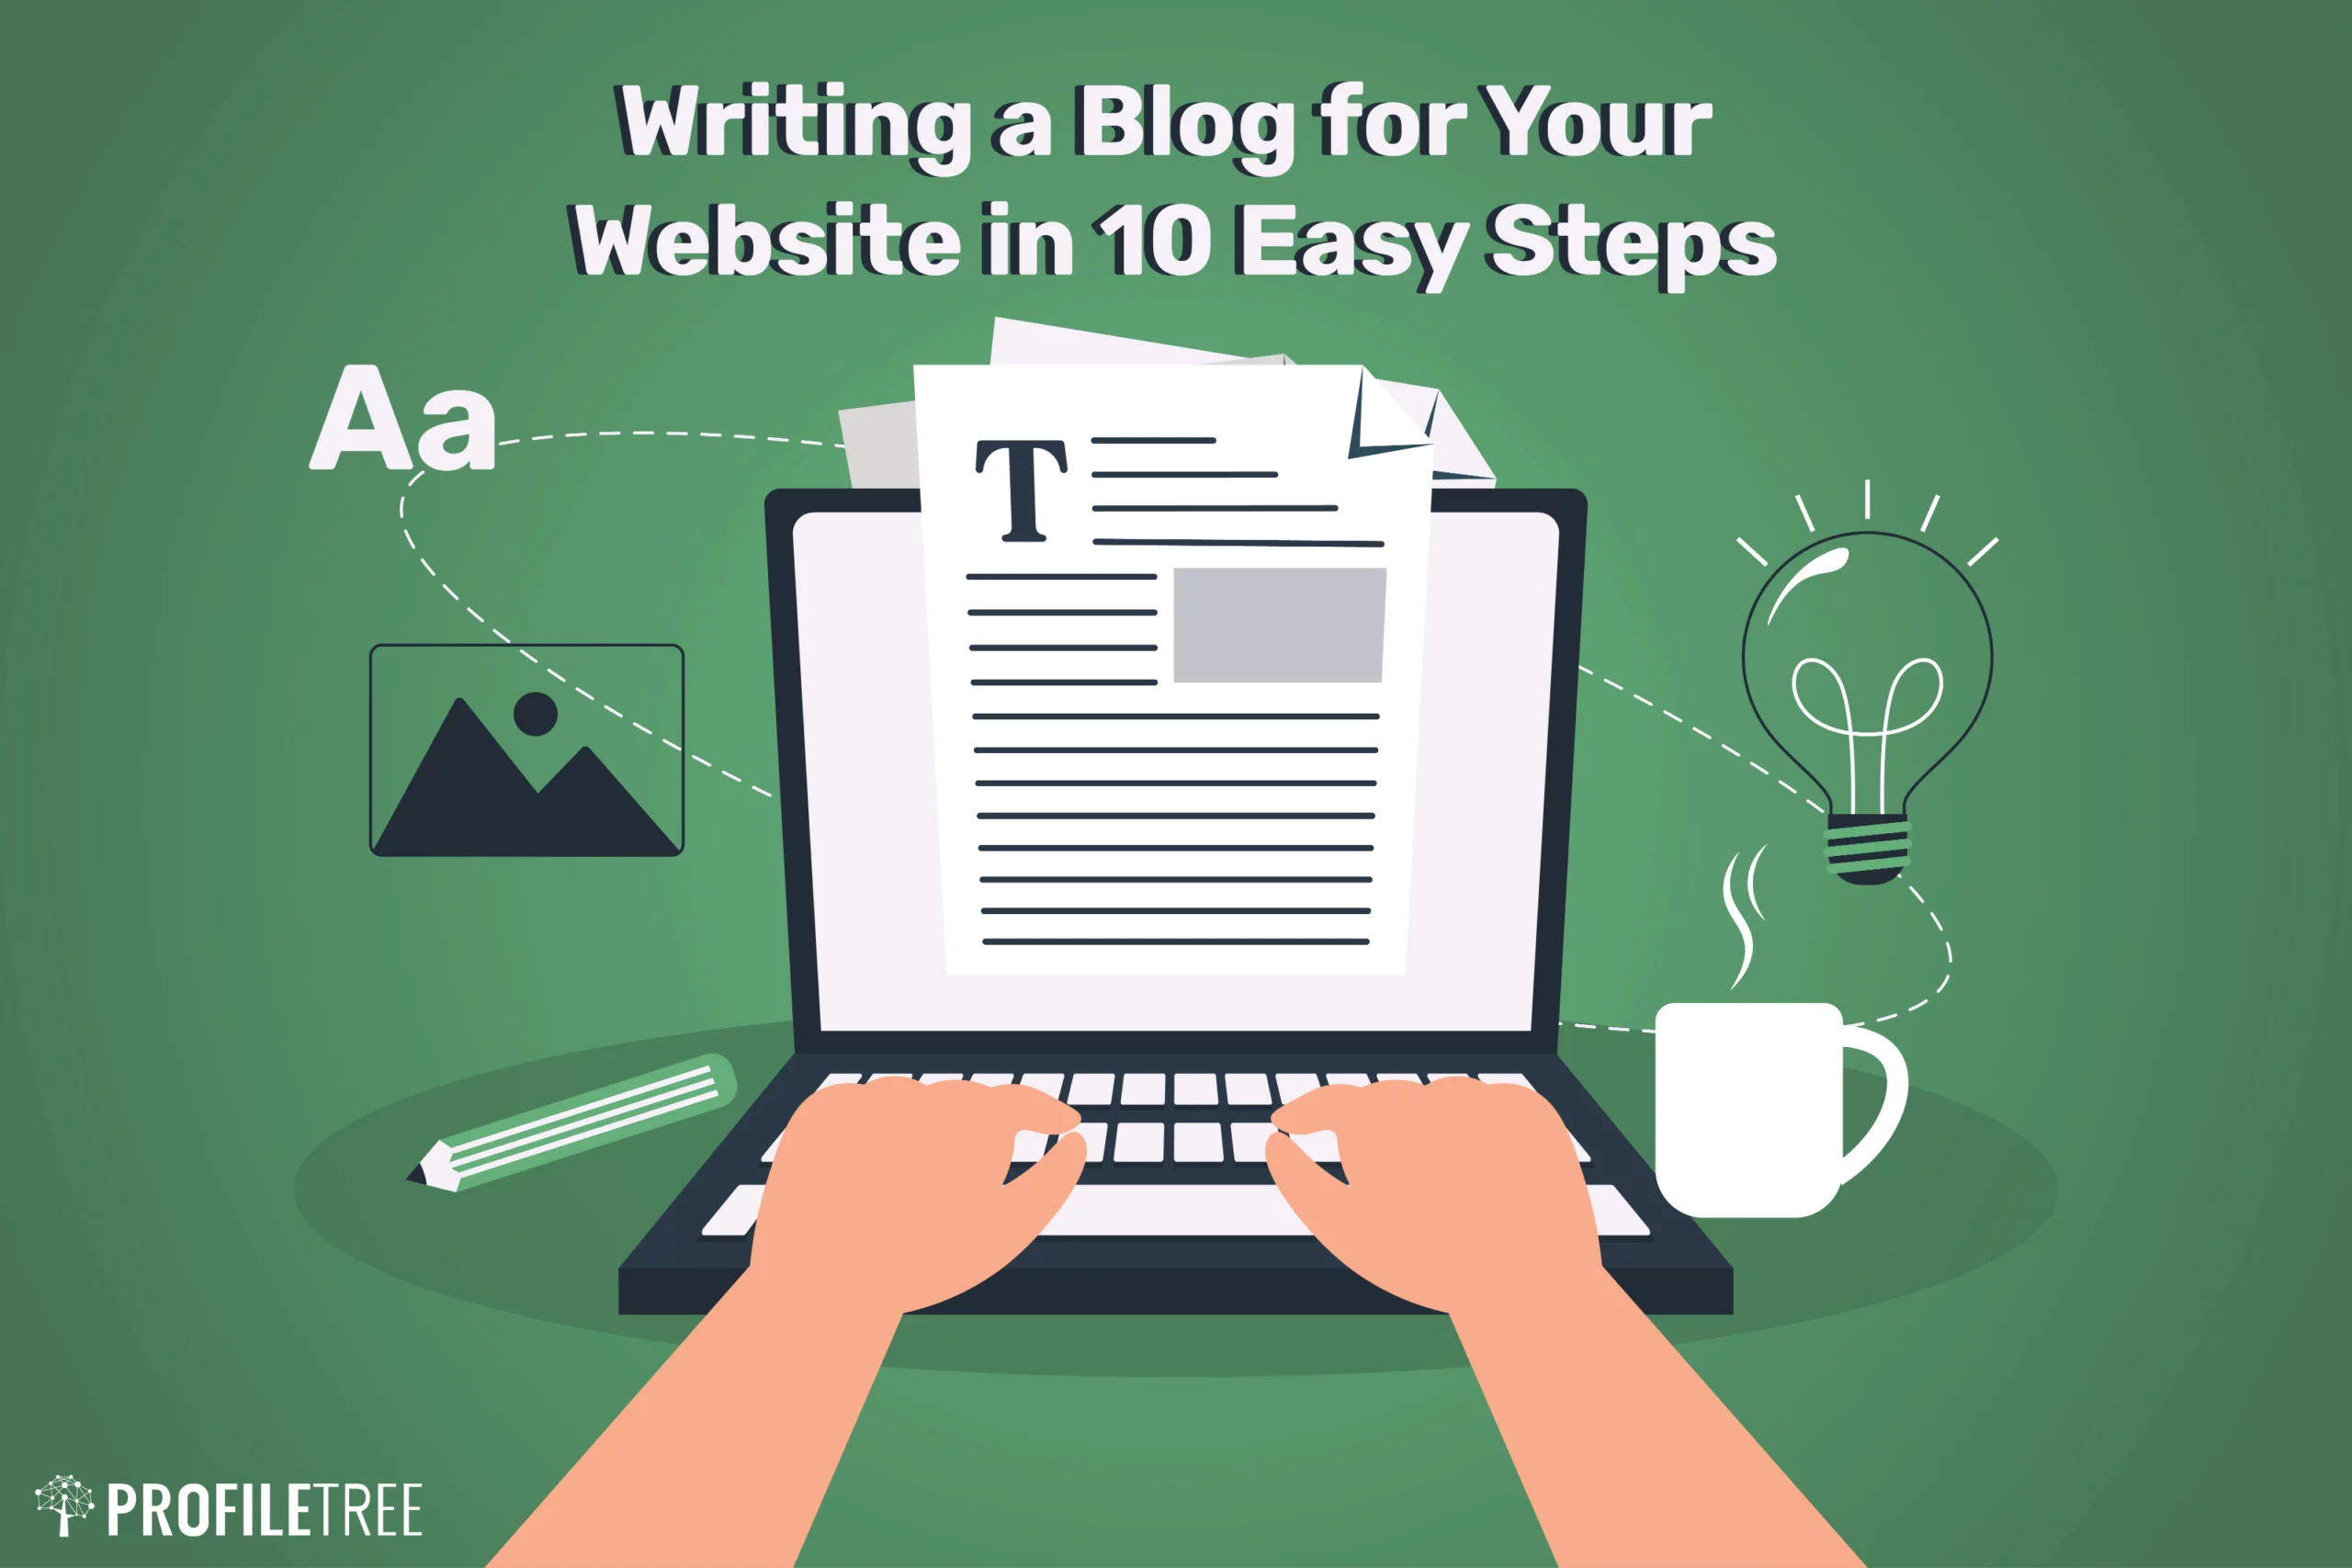 Writing a Blog for Your Website